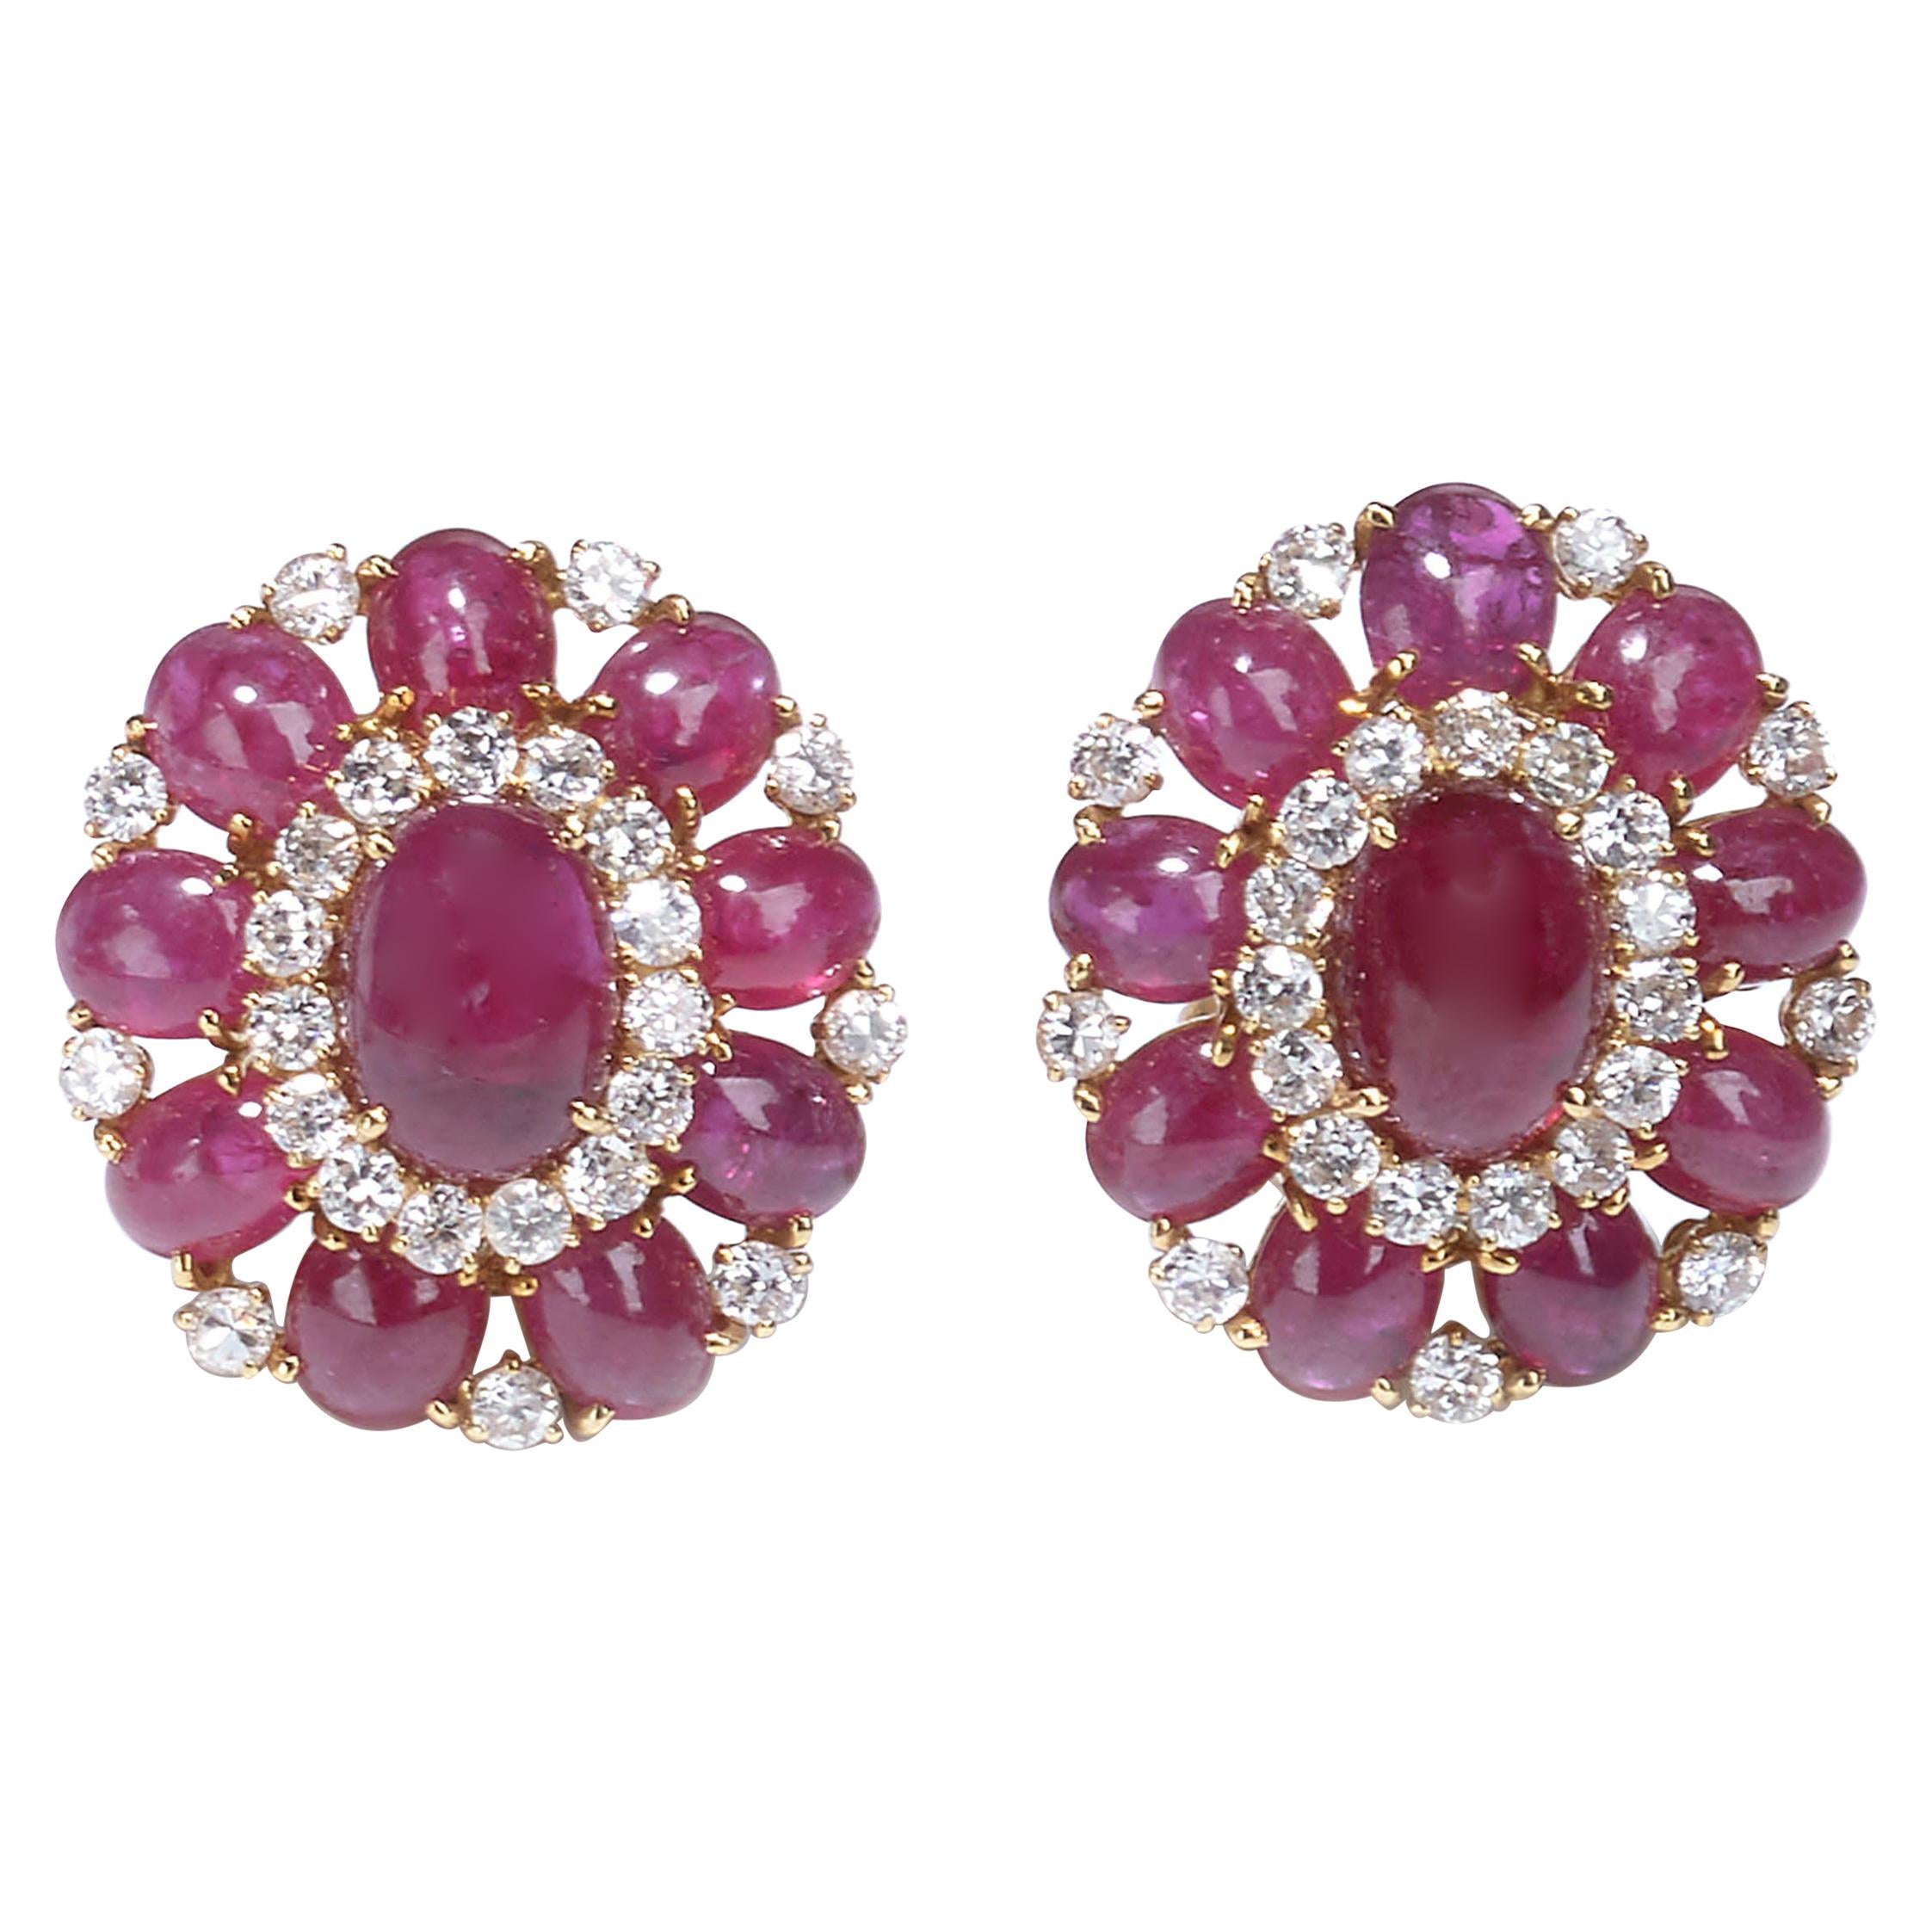 Vintage Cabochon Ruby and Diamond Earrings